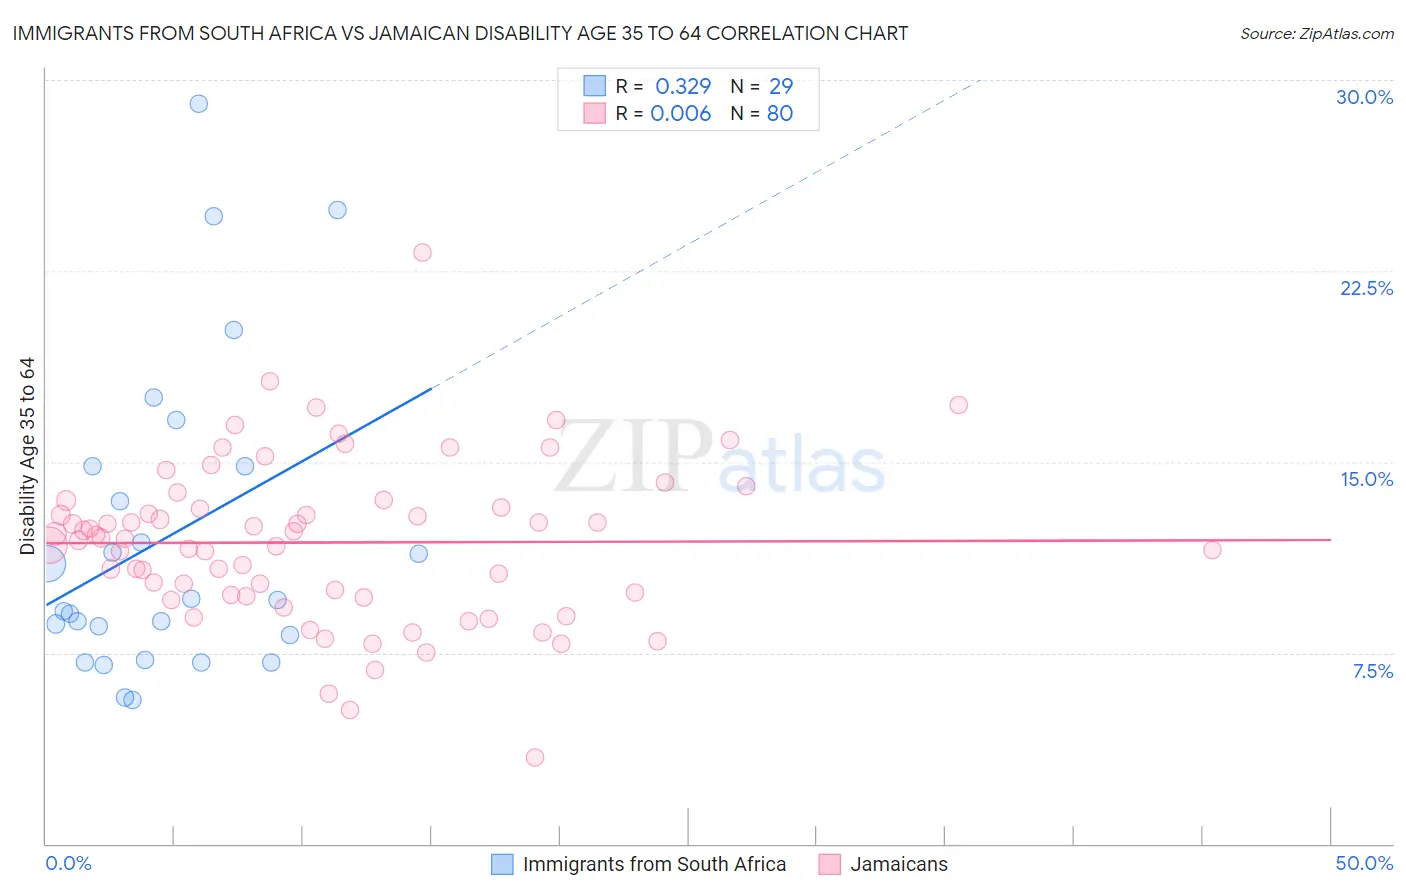 Immigrants from South Africa vs Jamaican Disability Age 35 to 64